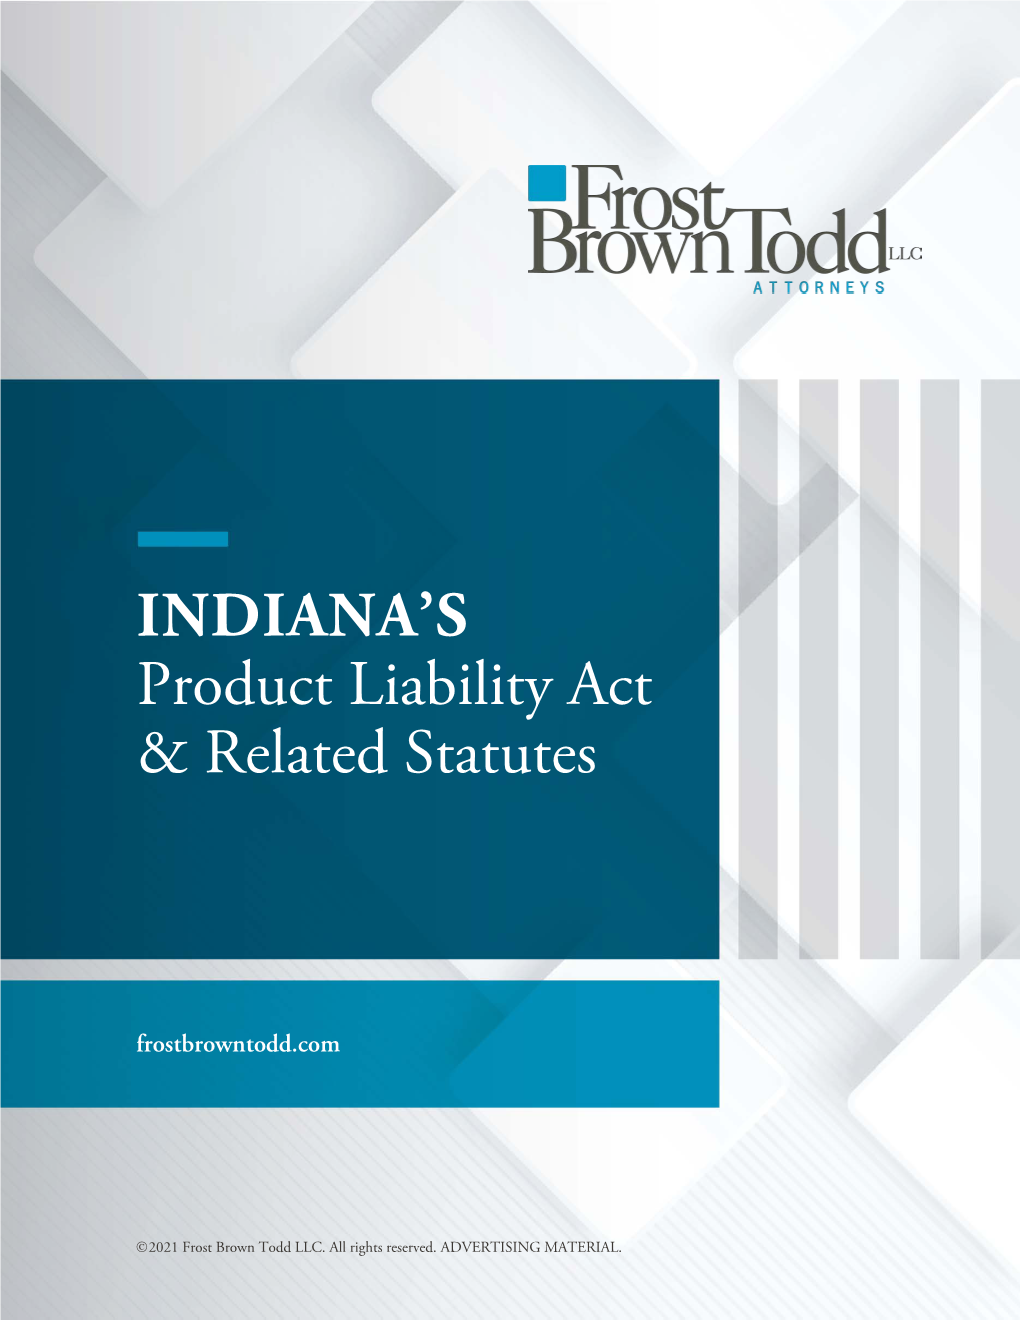 INDIANA's Product Liability Act & Related Statutes